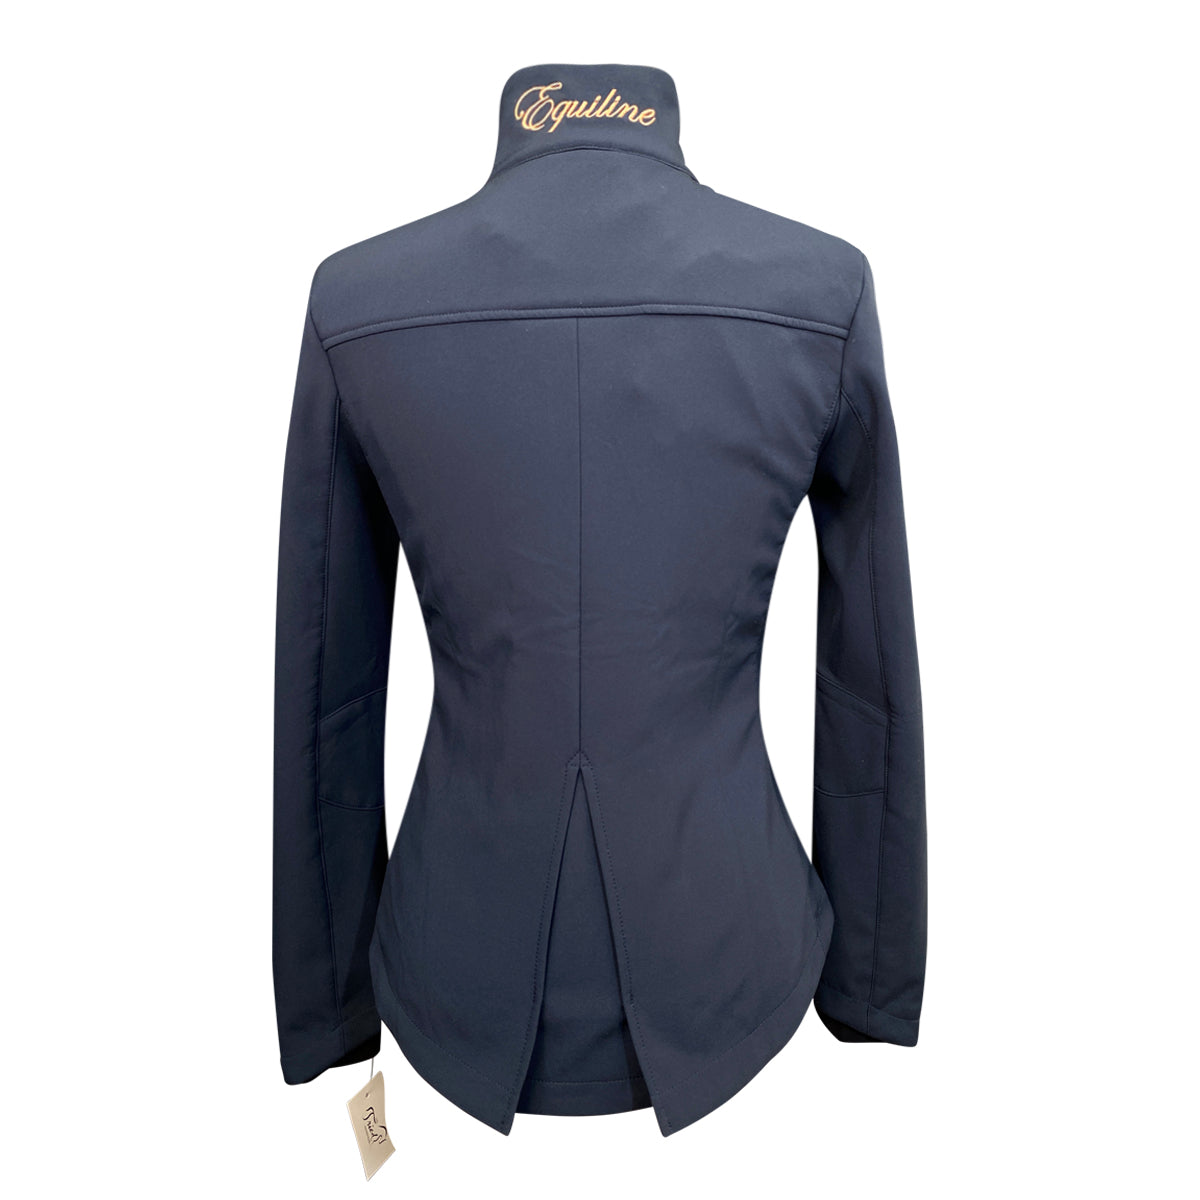 Equiline &#39;Ixoria&#39; Softshell Jacket in Navy - Women&#39;s Small